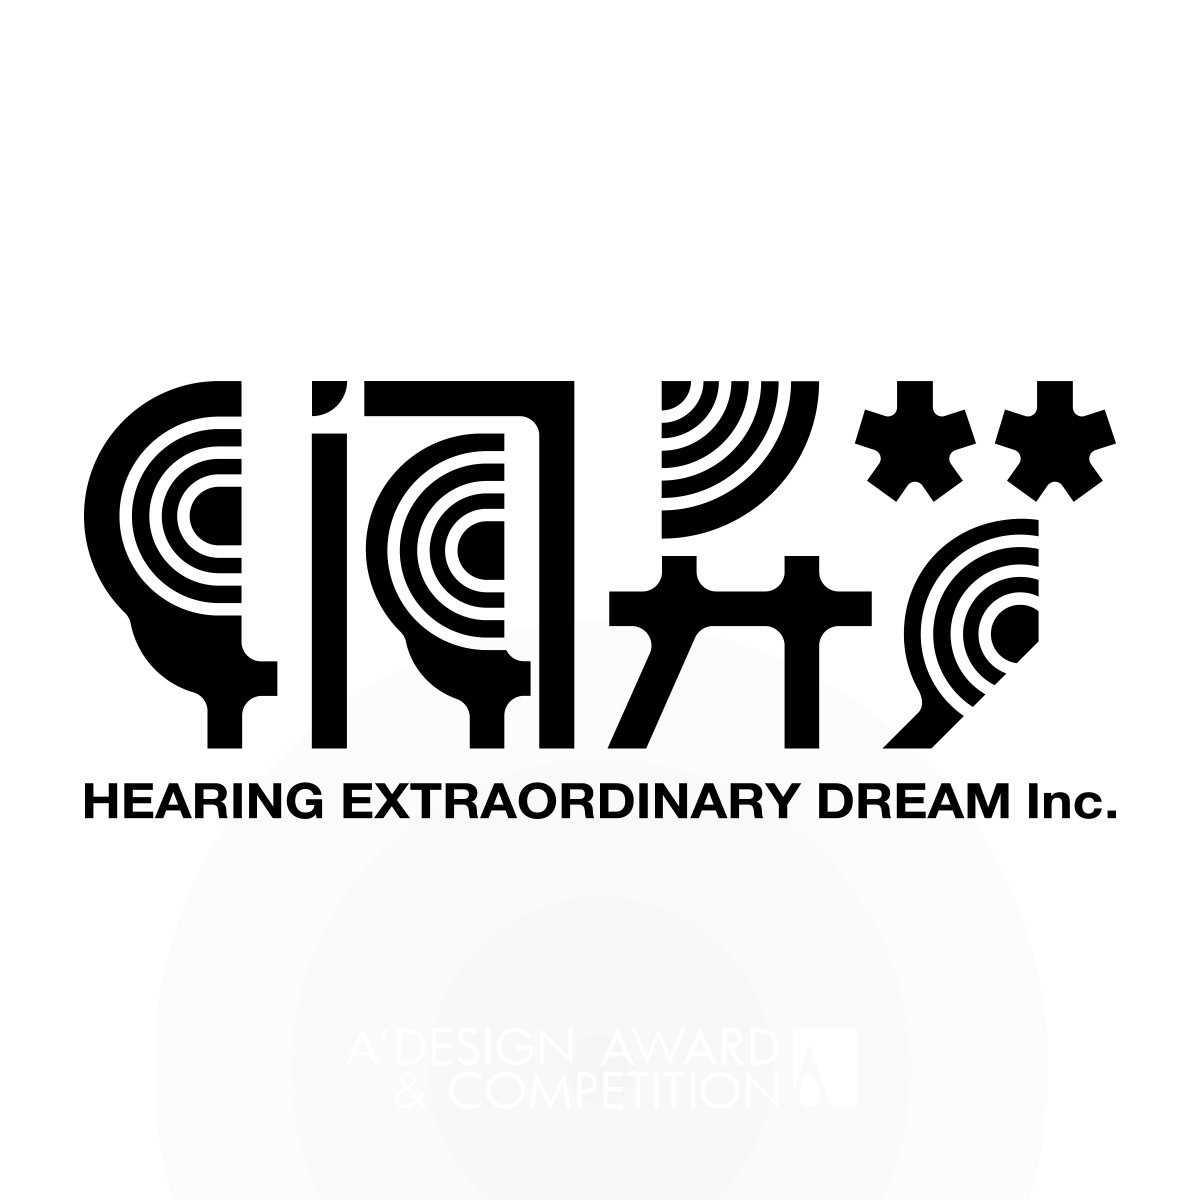 Hearing Extraordinary Dream Logo by Qiuyu Li has been granted the celebrated Bronze A' Design Award